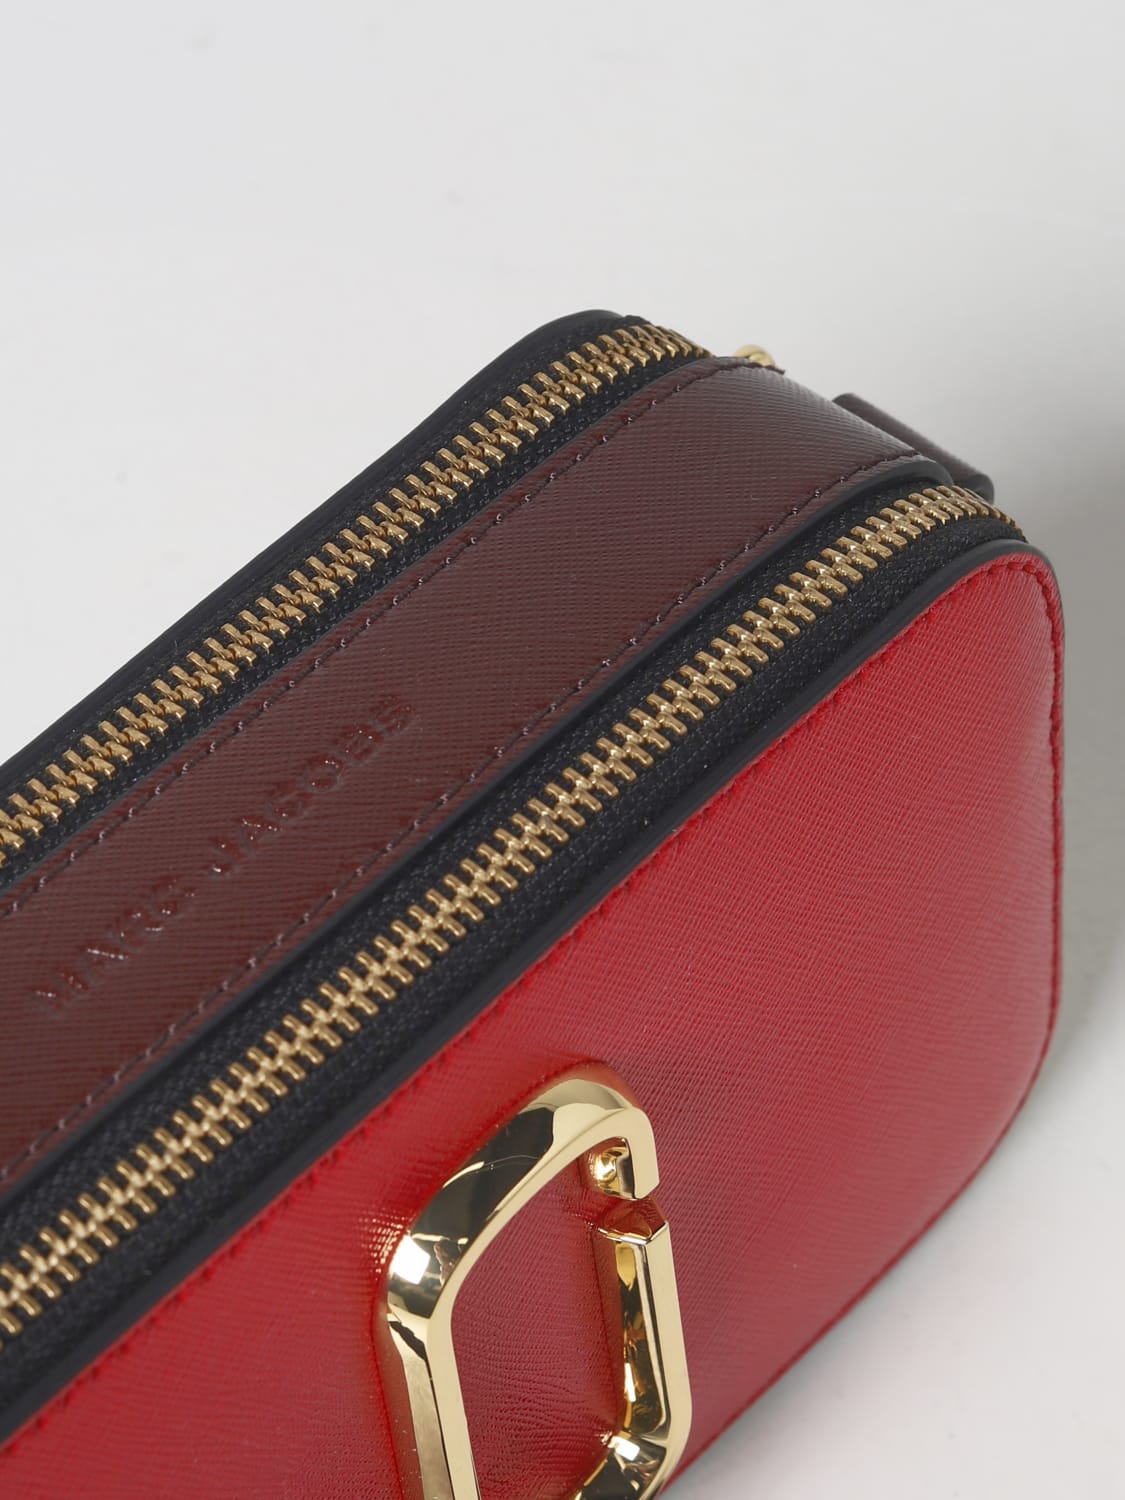 Marc Jacobs Red Small Snapshot Camera Bag Marc Jacobs